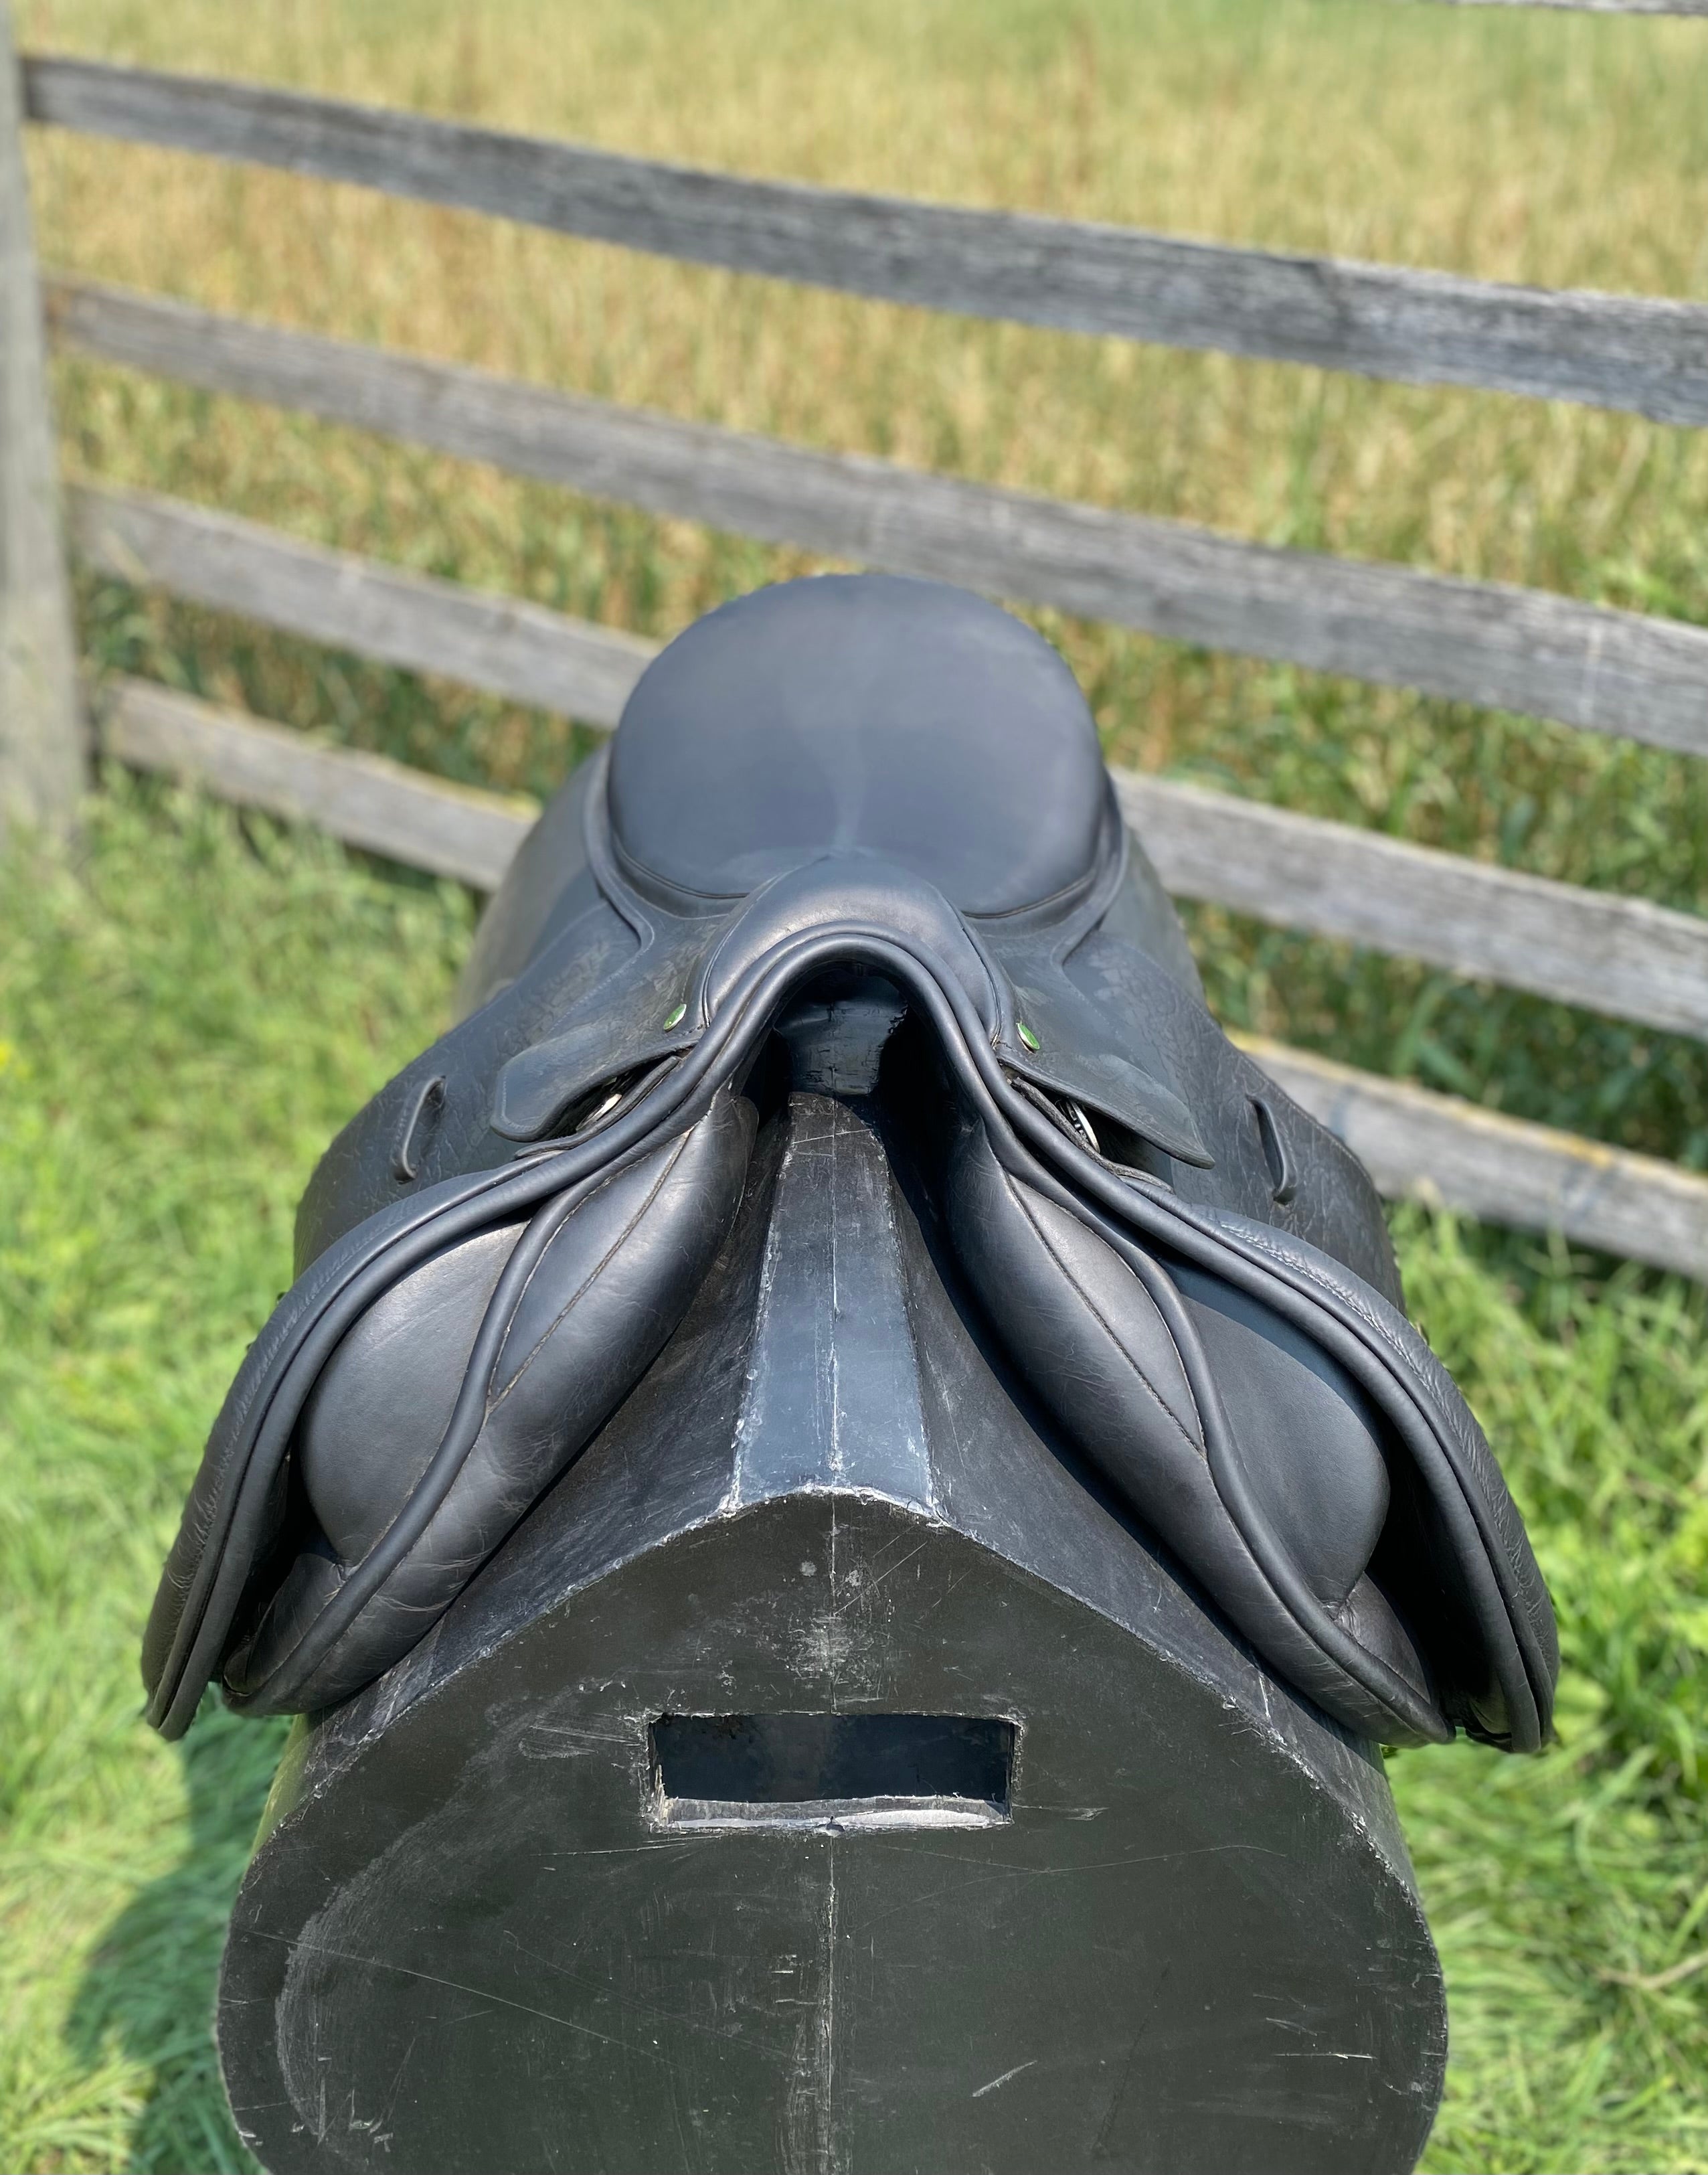 Used 17" County Conquest Jump Saddle